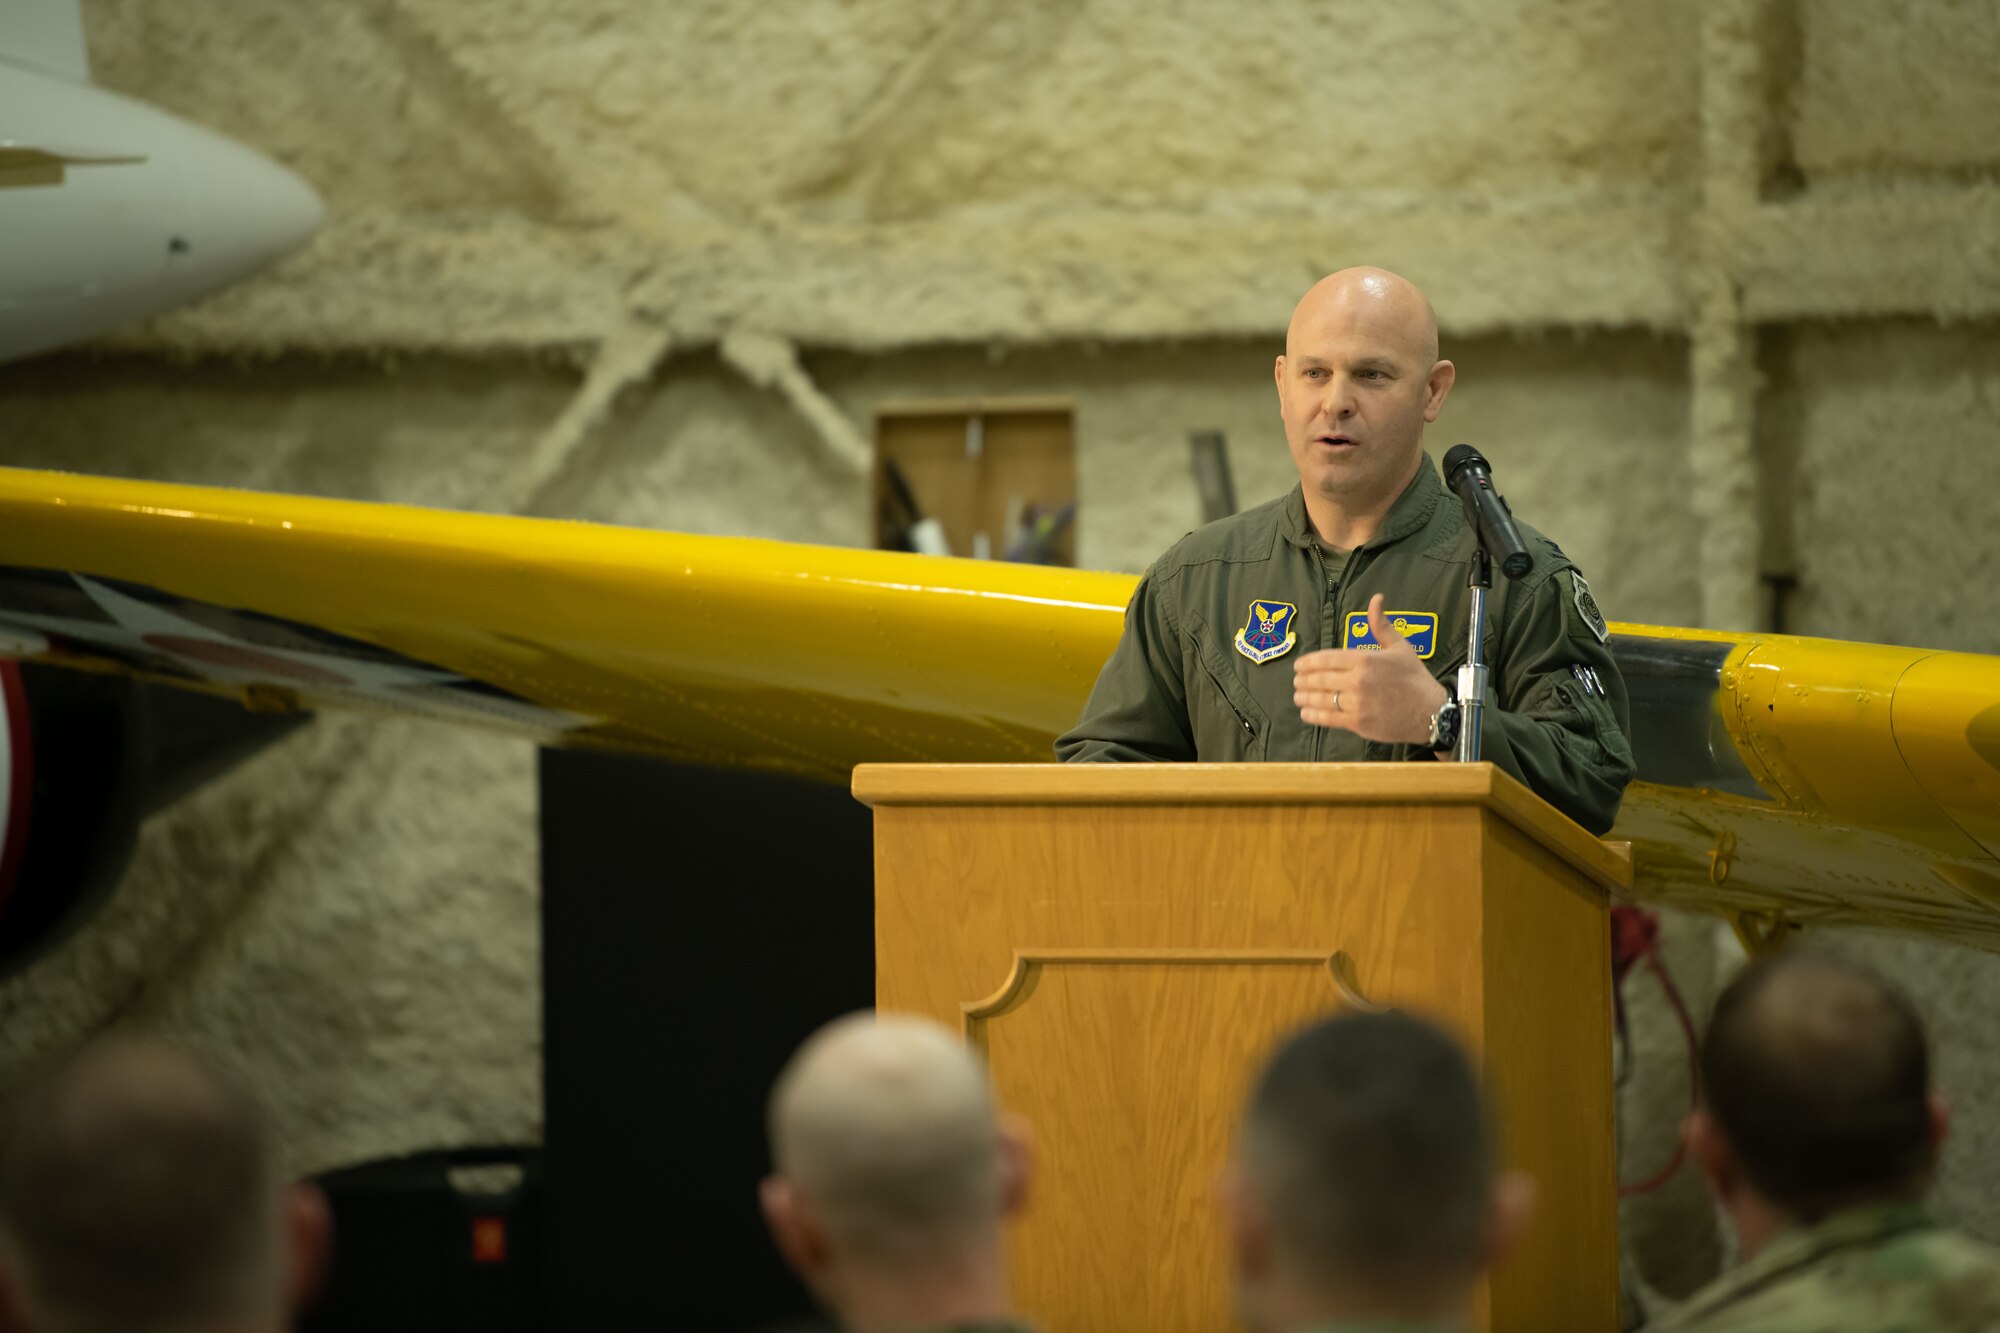 Col. Joseph Sheffield, 28th Bomb Wing commander, Dedicates a new Joint Air-to-Surface Standoff Missile (JASSM) to the South Dakota Air and Space Museum, April 18, 2022.